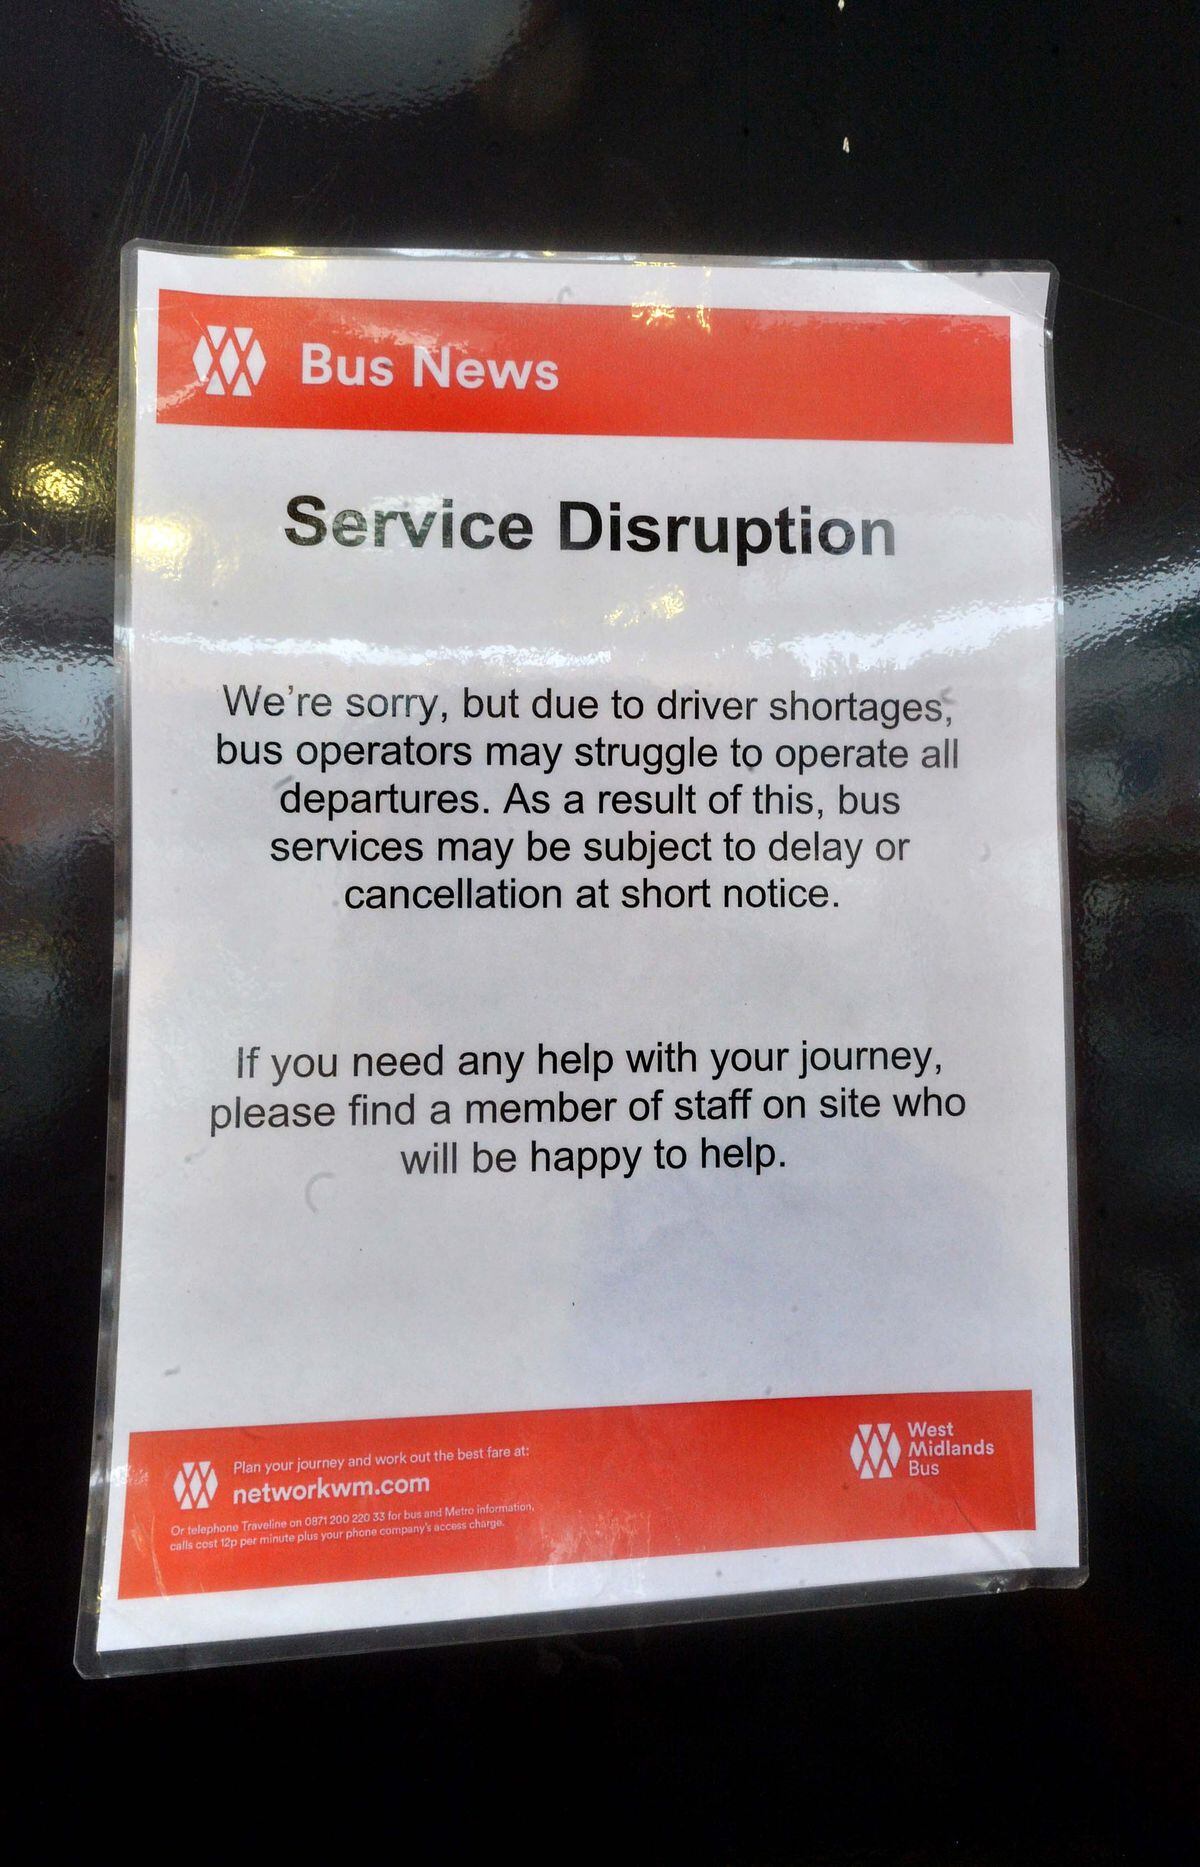 The company has warned passengers to avoid using the few buses that do continue to operate during the strikes